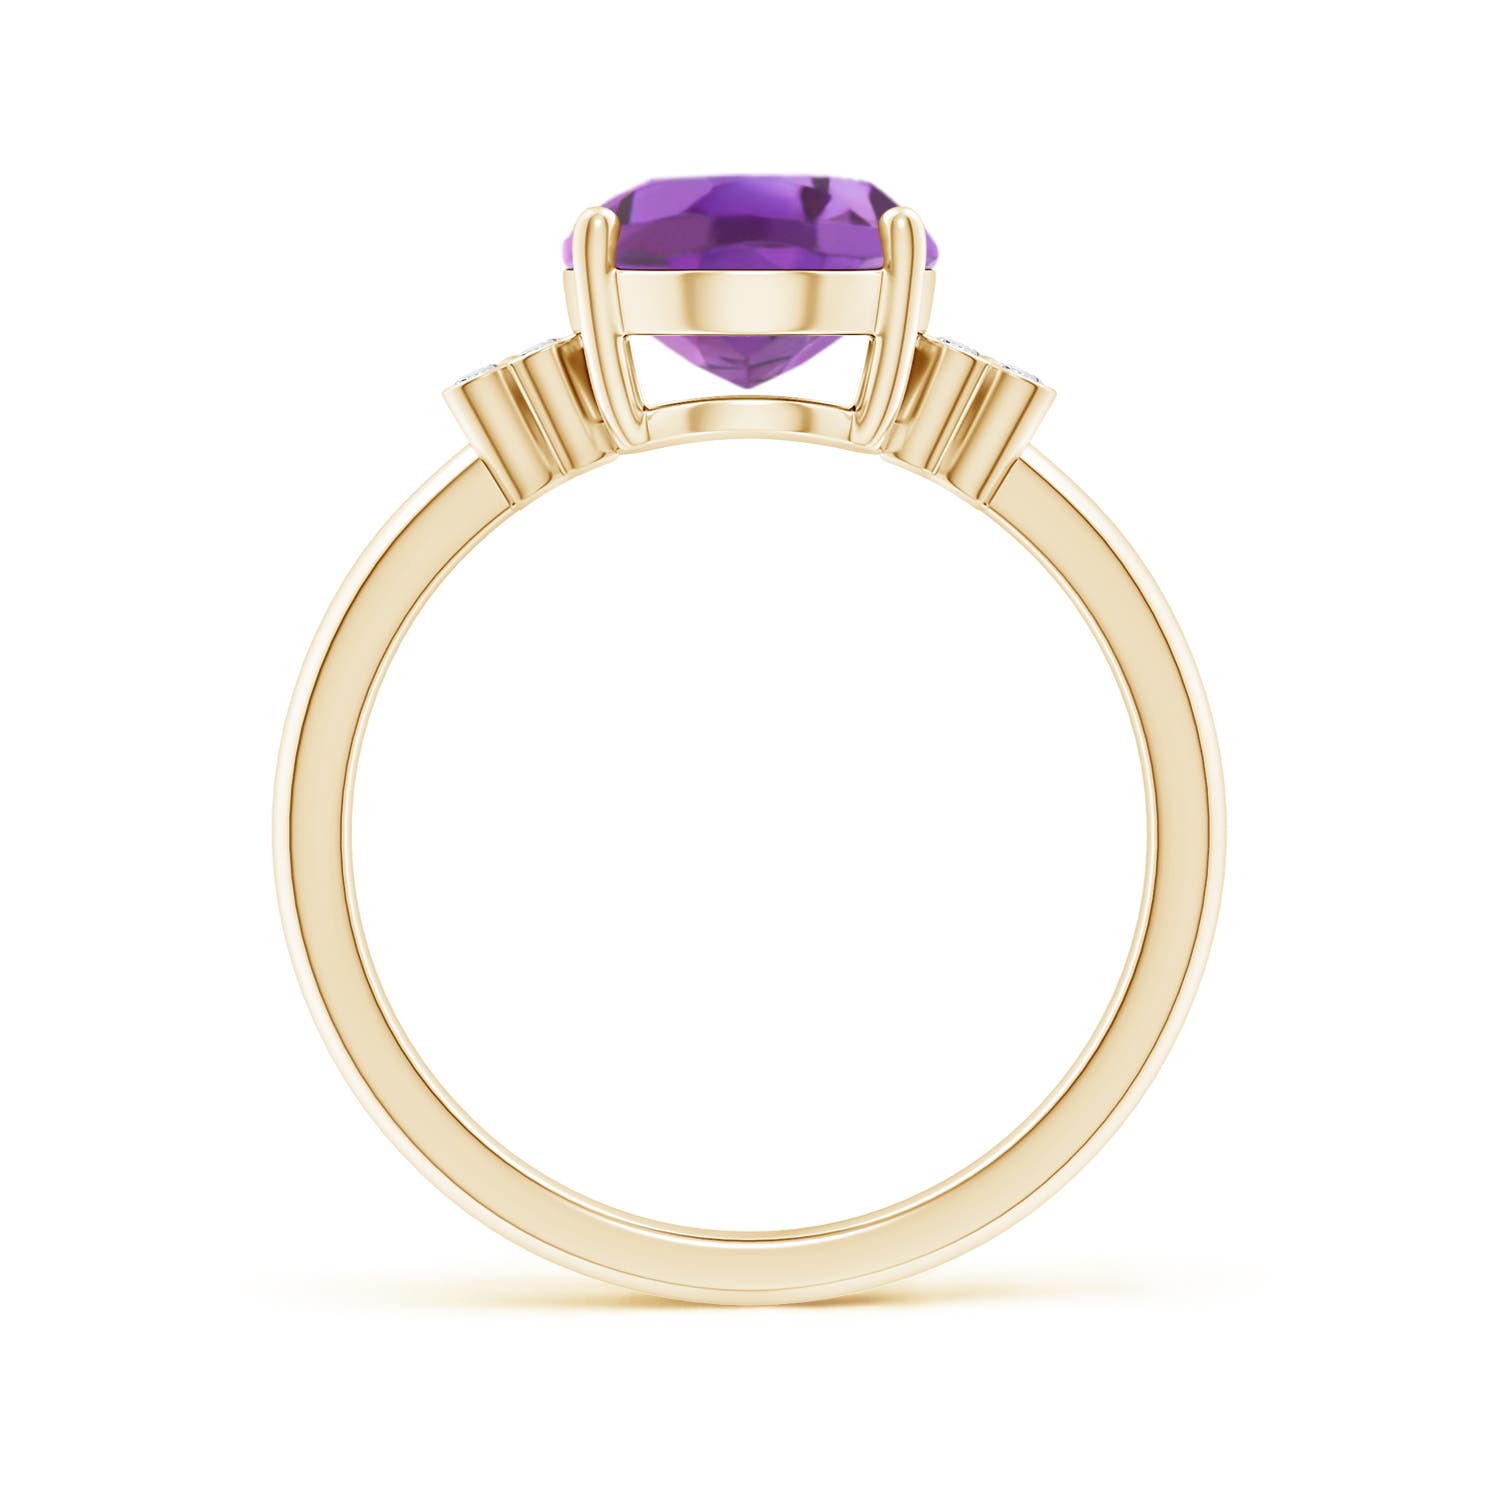 A- Amethyst / 2.36 CT / 14 KT Yellow Gold